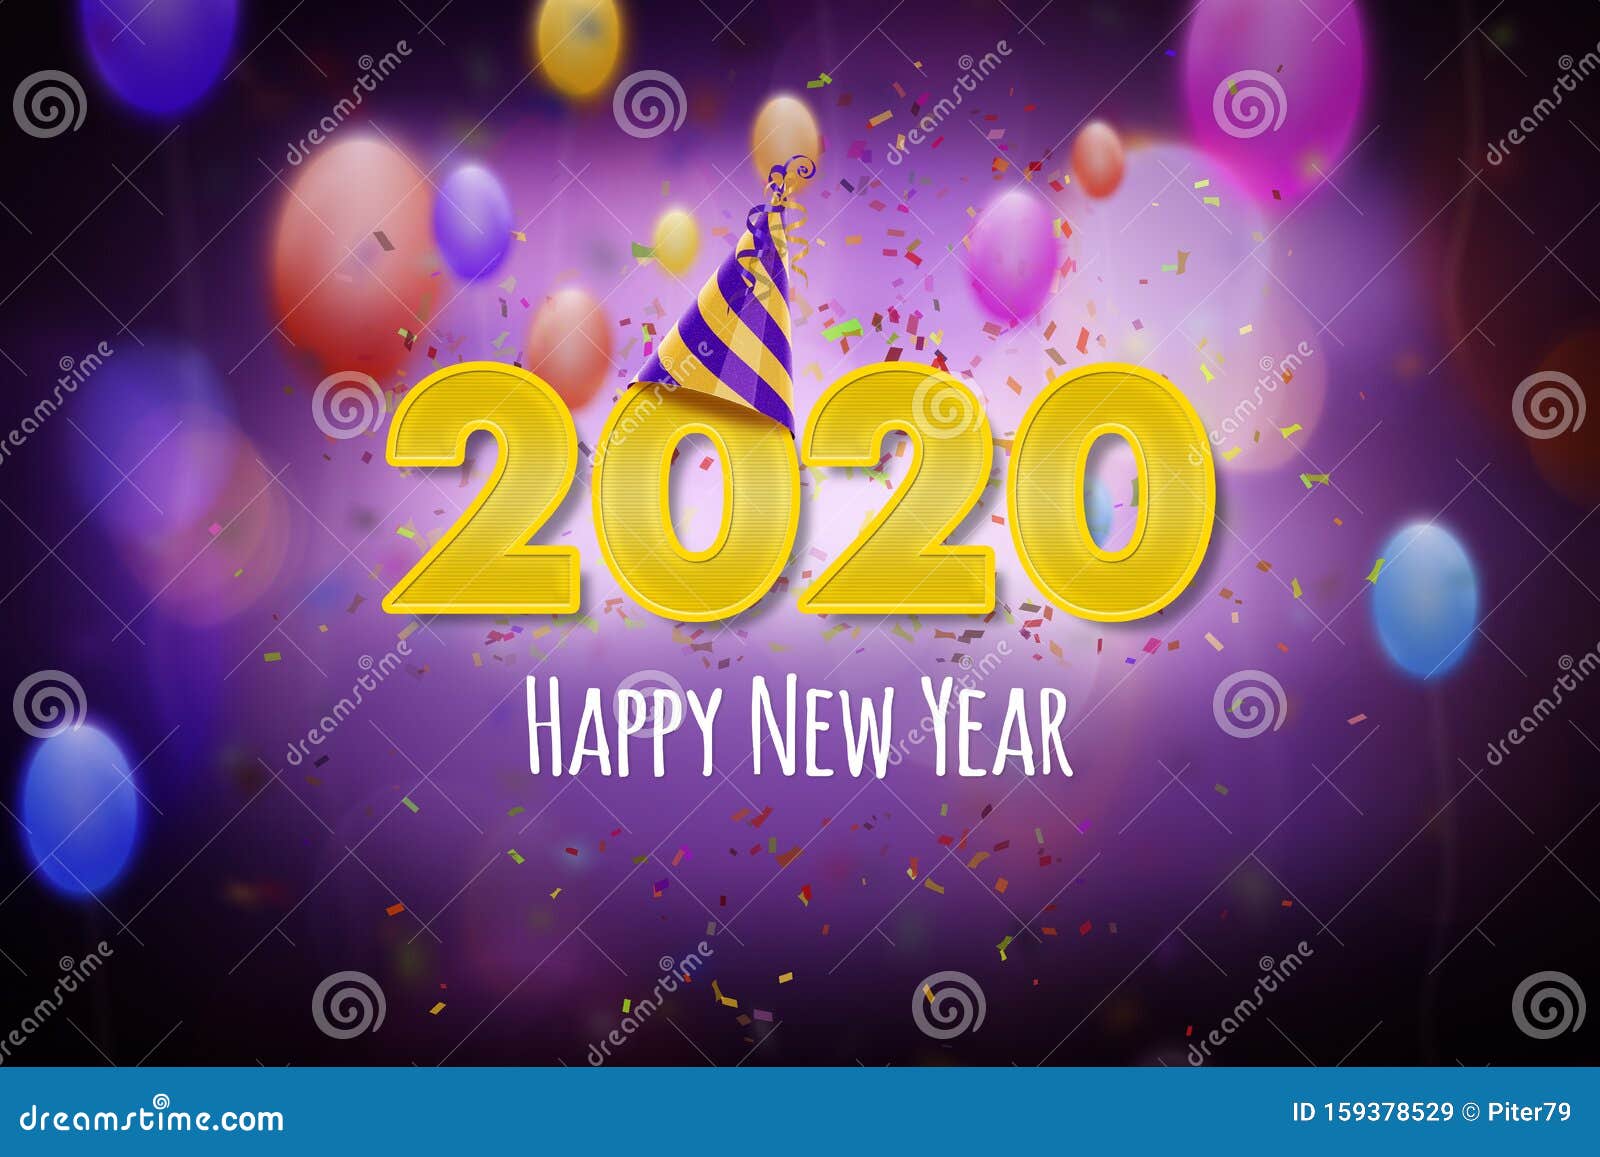 New Year 2020, Happy New Year Greeting Card Concept with a ...